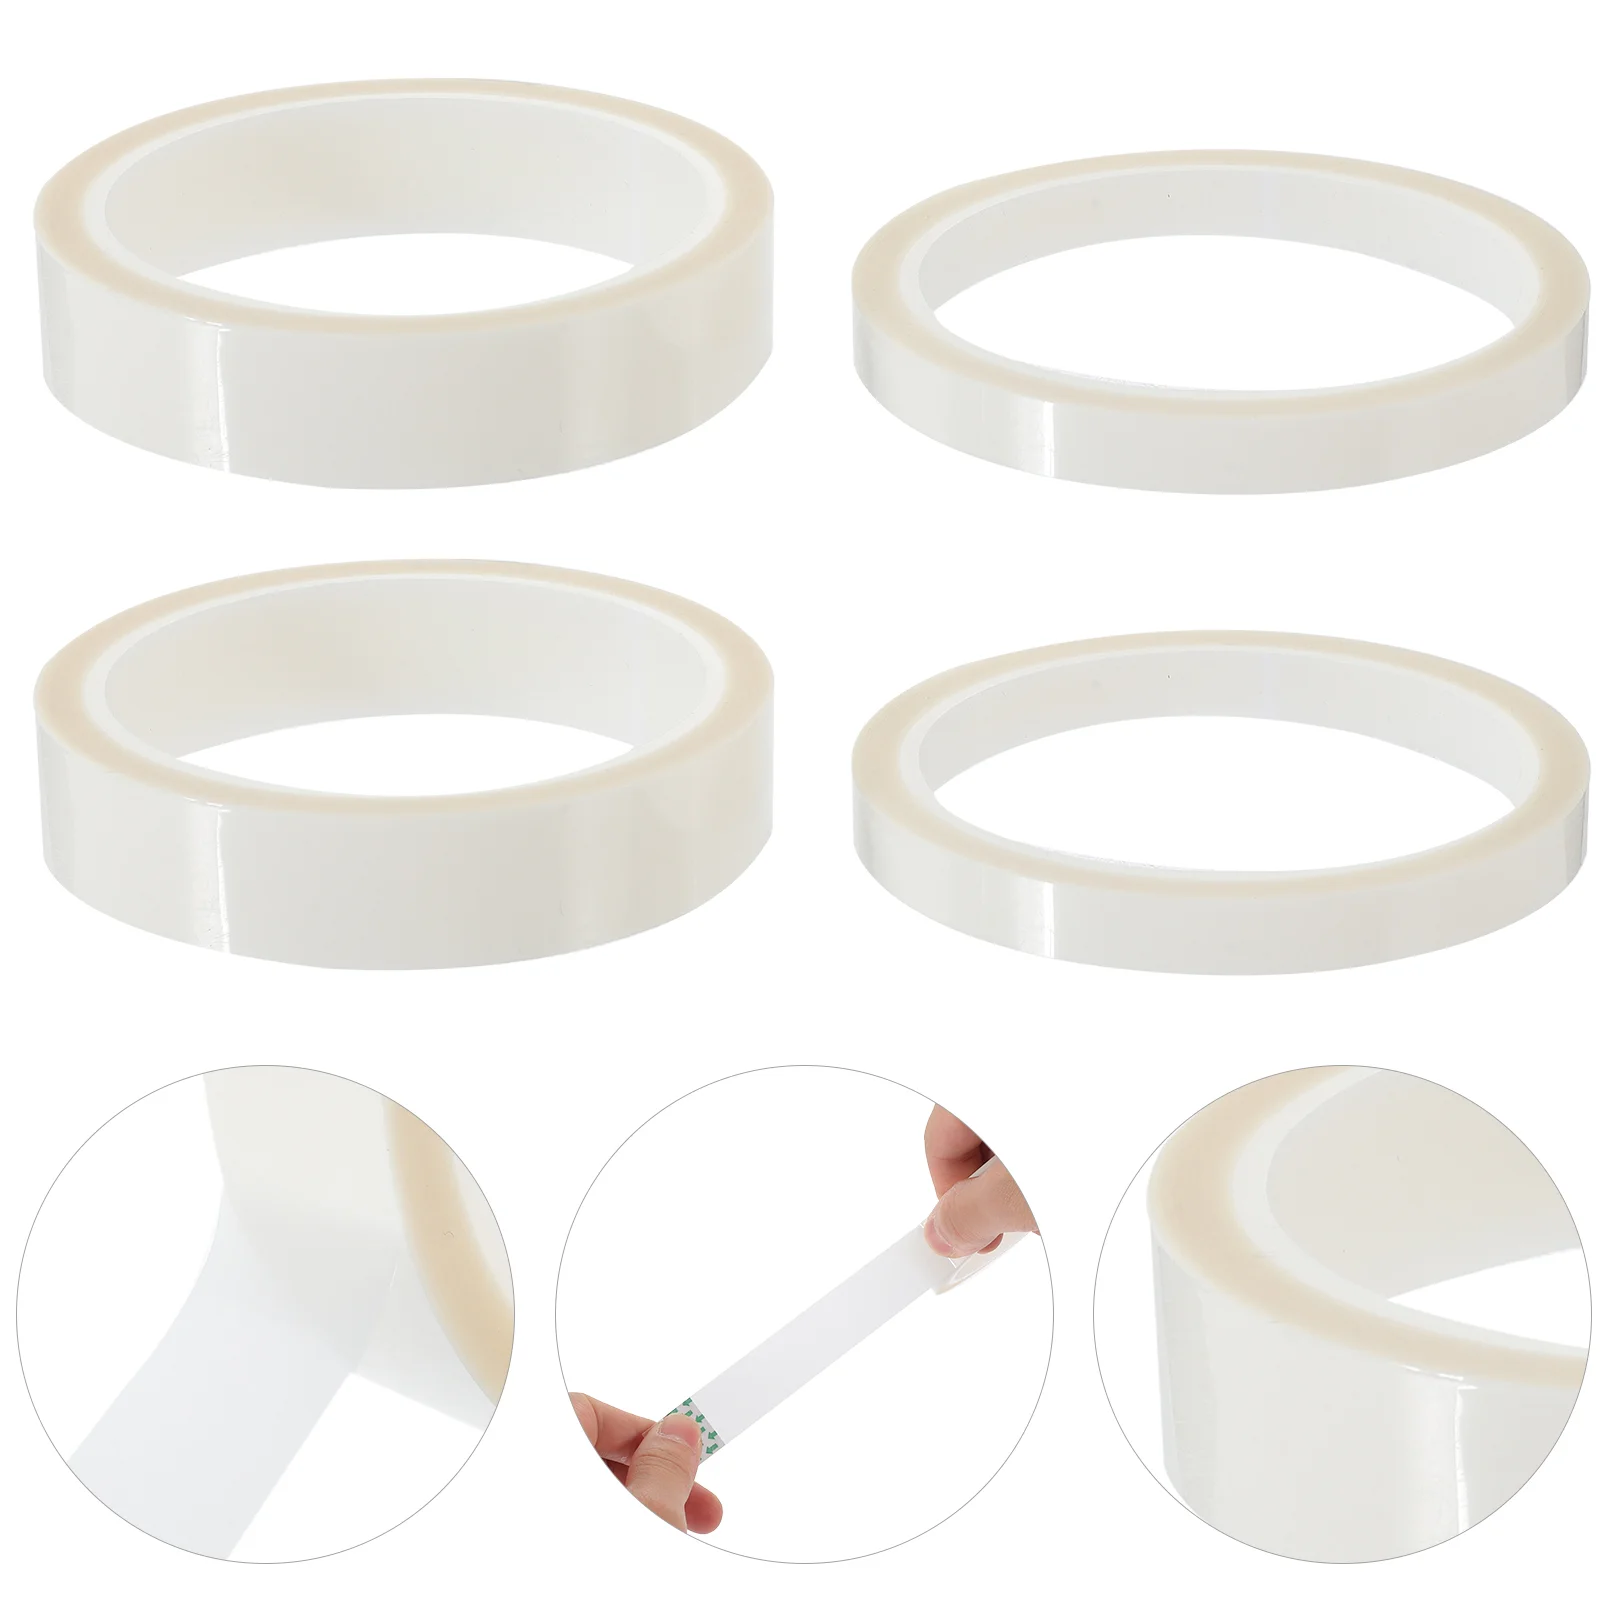 4 Pcs Insulating Adhesive Tape Coil Supply Wear-resistant Thermal Heat Transfer DIY Protective Portable Seal